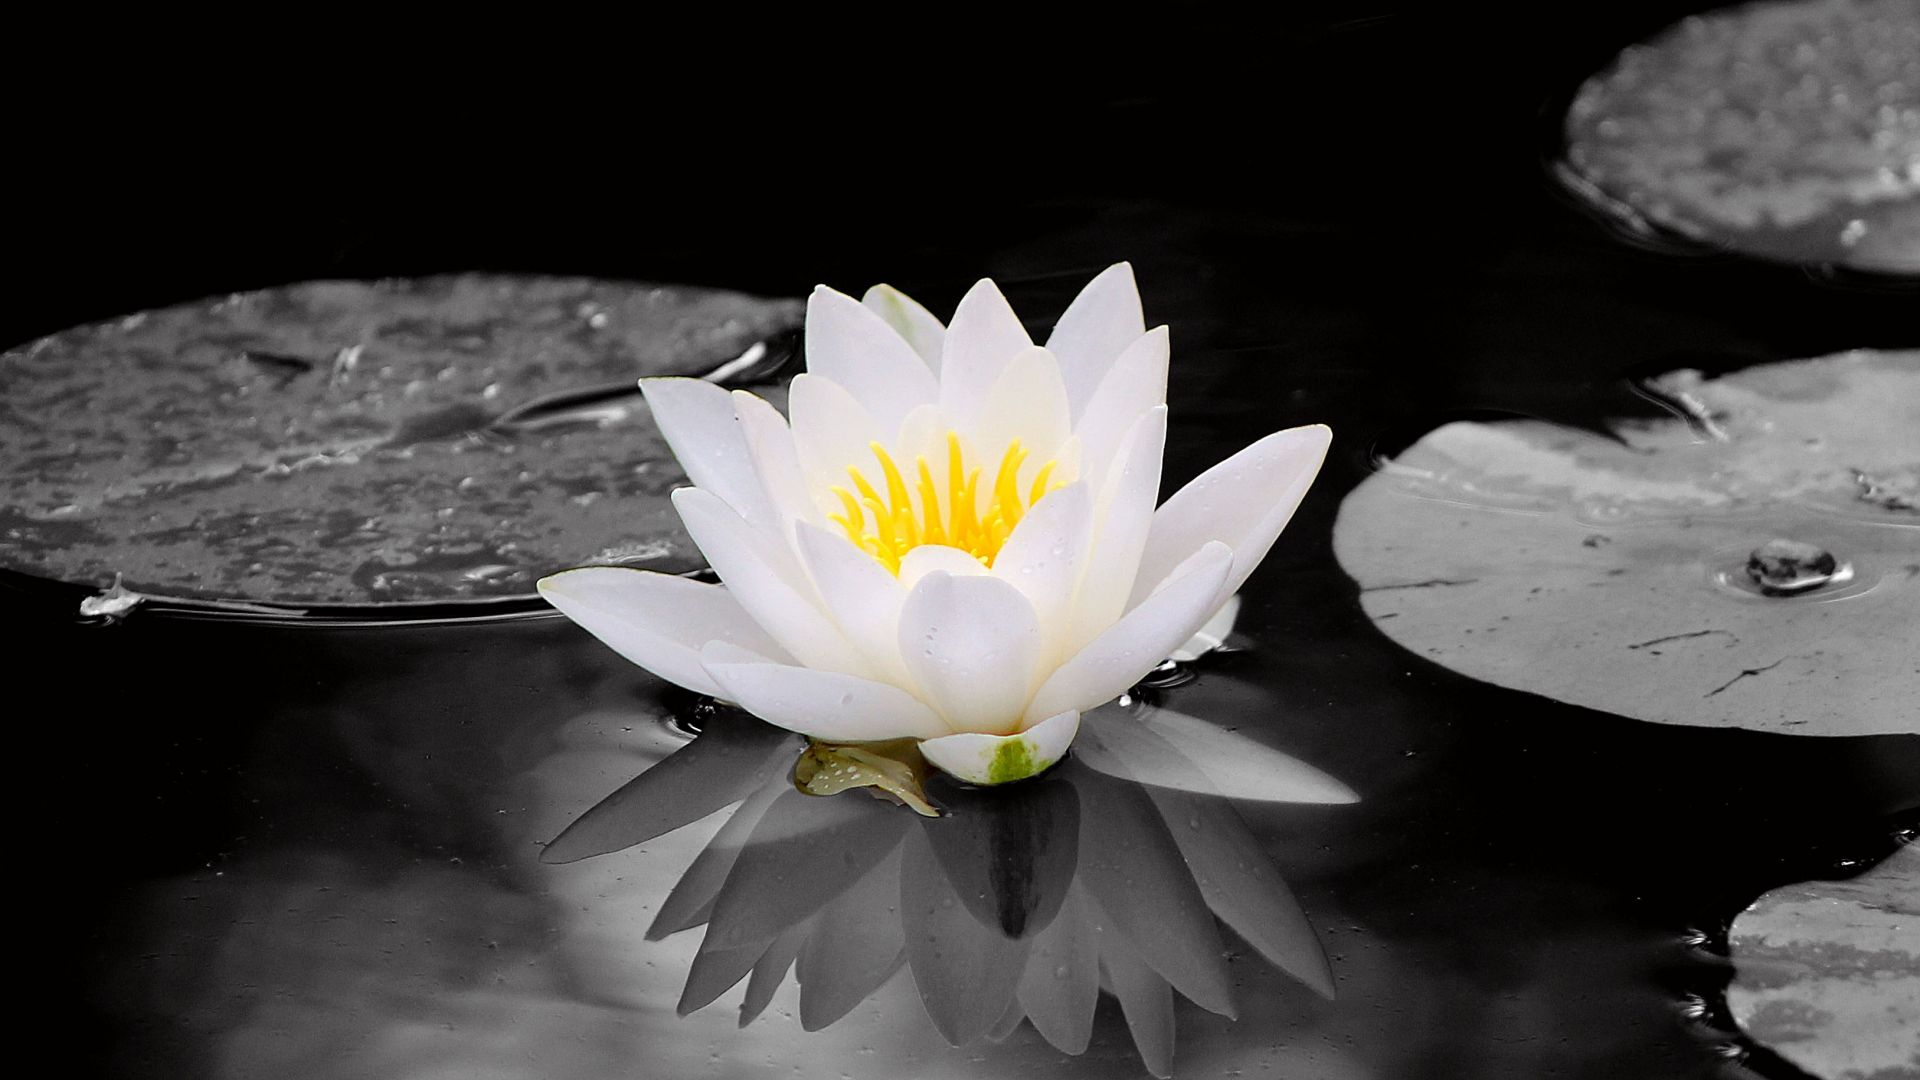 1920x1080 Desktop Wallpaper White Water Lily, Flowers, Pond, 4k, Hd Image, Picture, Background, 048b9d